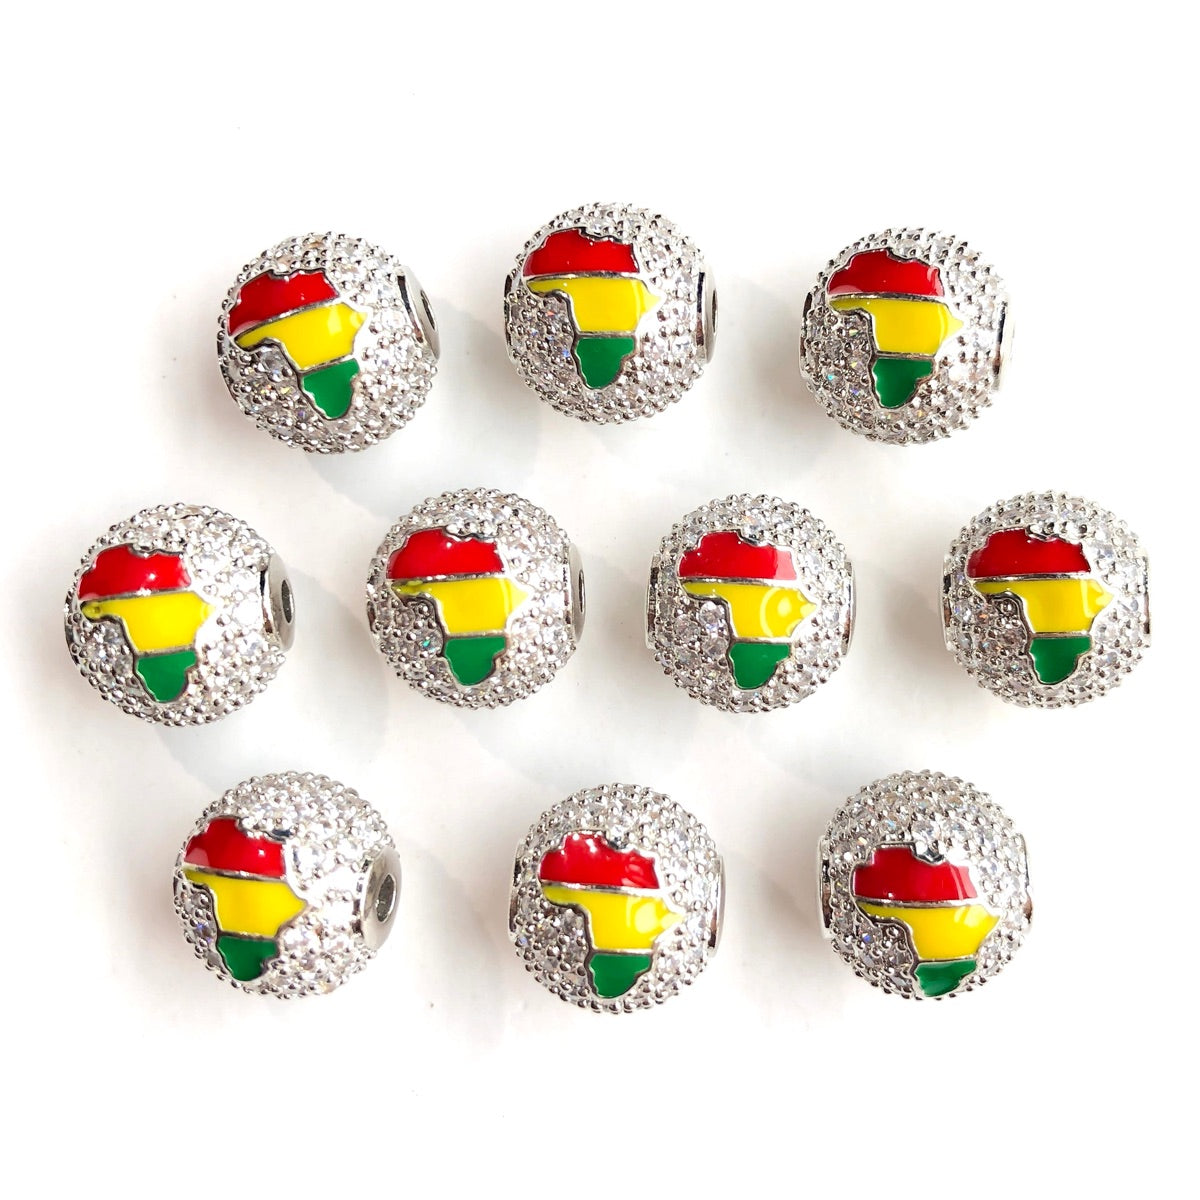 10pcs/lot 12mm CZ Paved Red Yellow Green Enamel Africa Map Ball Spacers Beads for Black History Silver CZ Paved Spacers Ball Beads Juneteenth & Black History Month Awareness New Spacers Arrivals Charms Beads Beyond